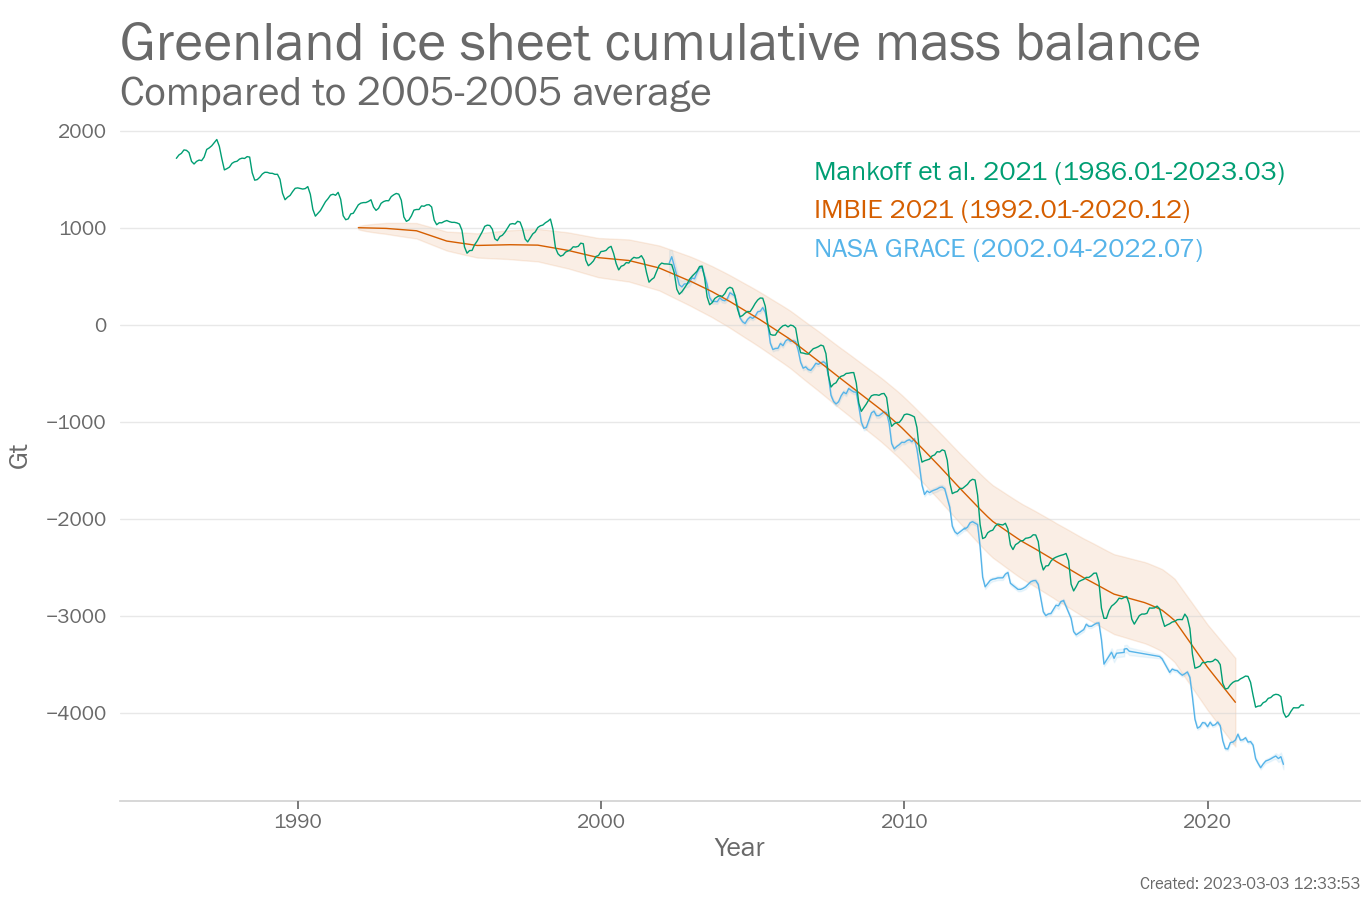 Monthly Greenland ice sheet cumulative mass balance (Gt, difference from the 2005-2005 average)  from 1986-2023. Data are from the following three data sets: NASA GRACE, IMBIE 2021, Mankoff et al. 2021.